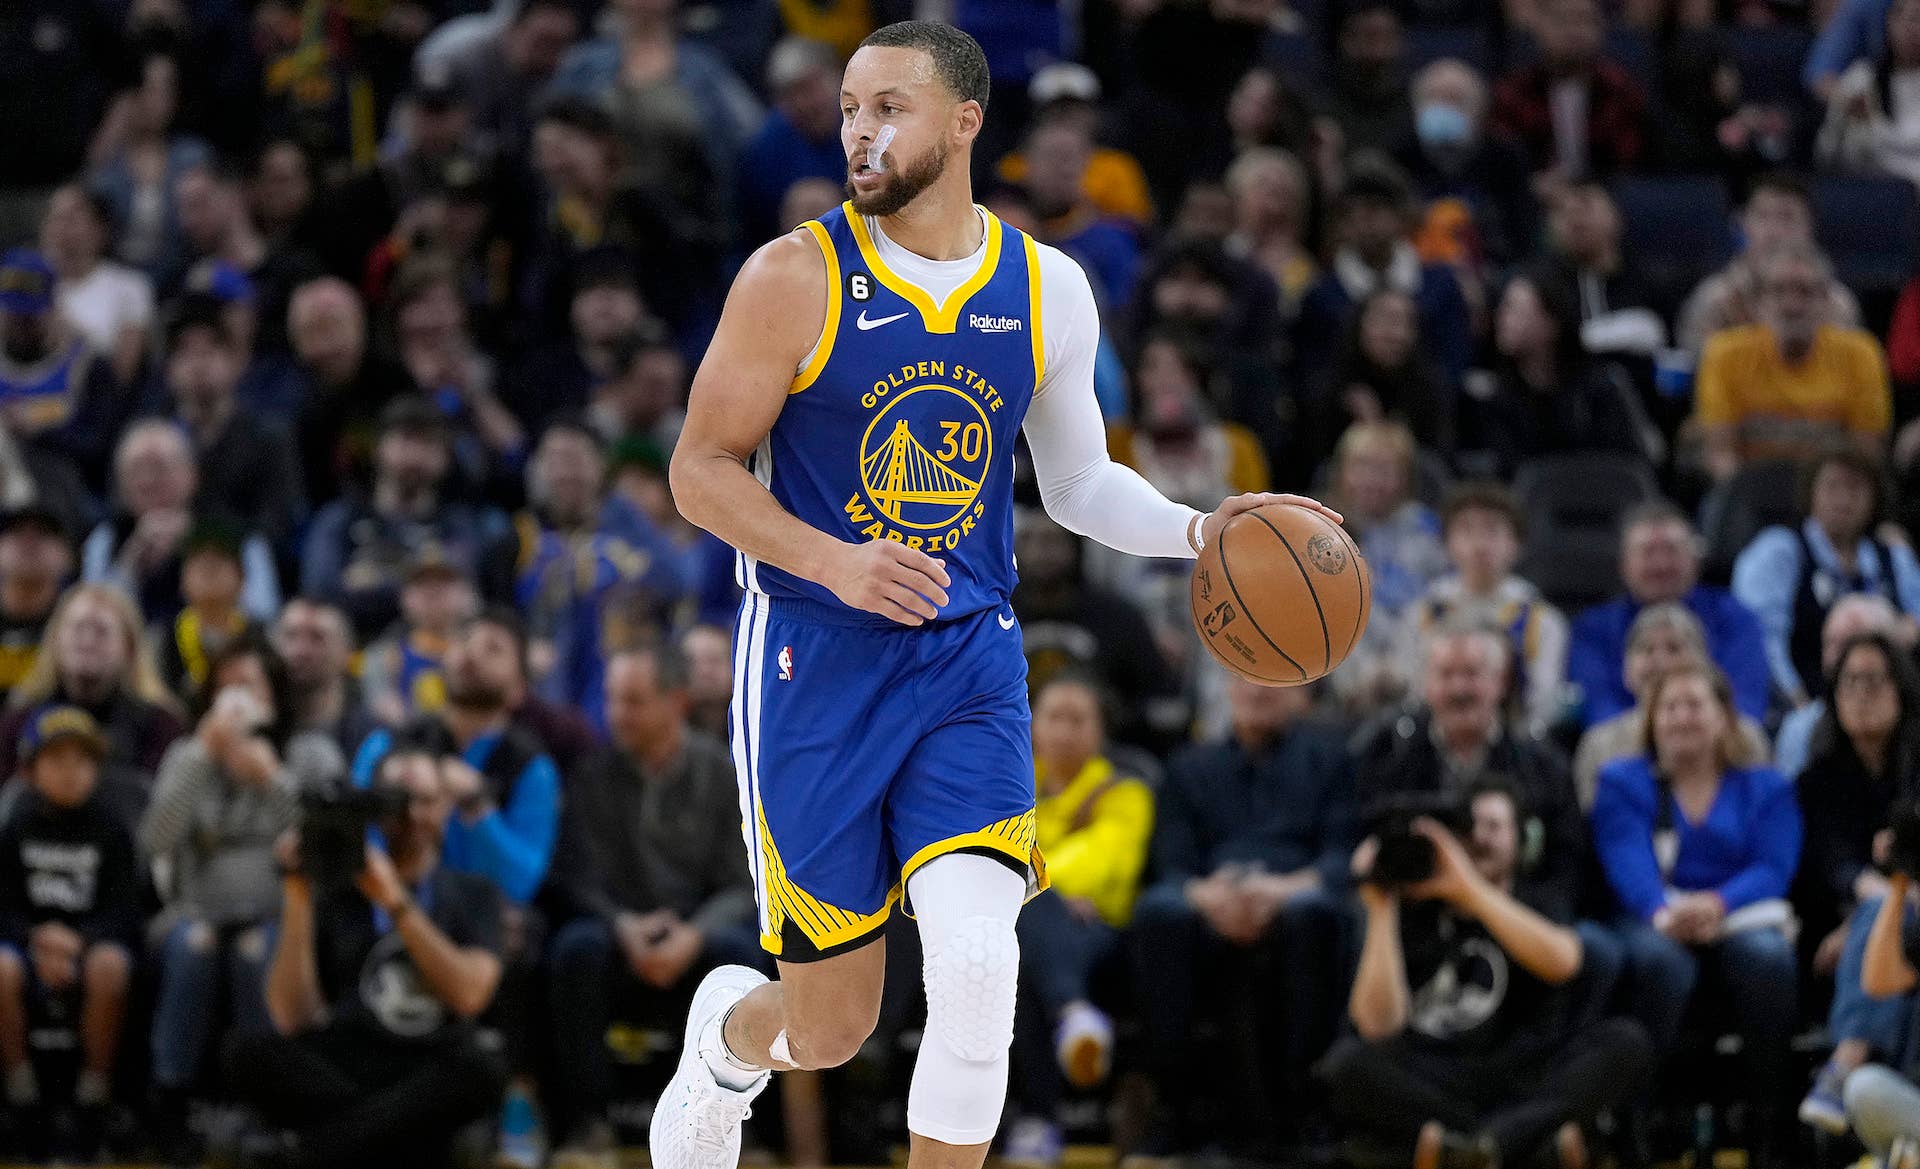 Steph Curry will miss multiple weeks with a left leg injury